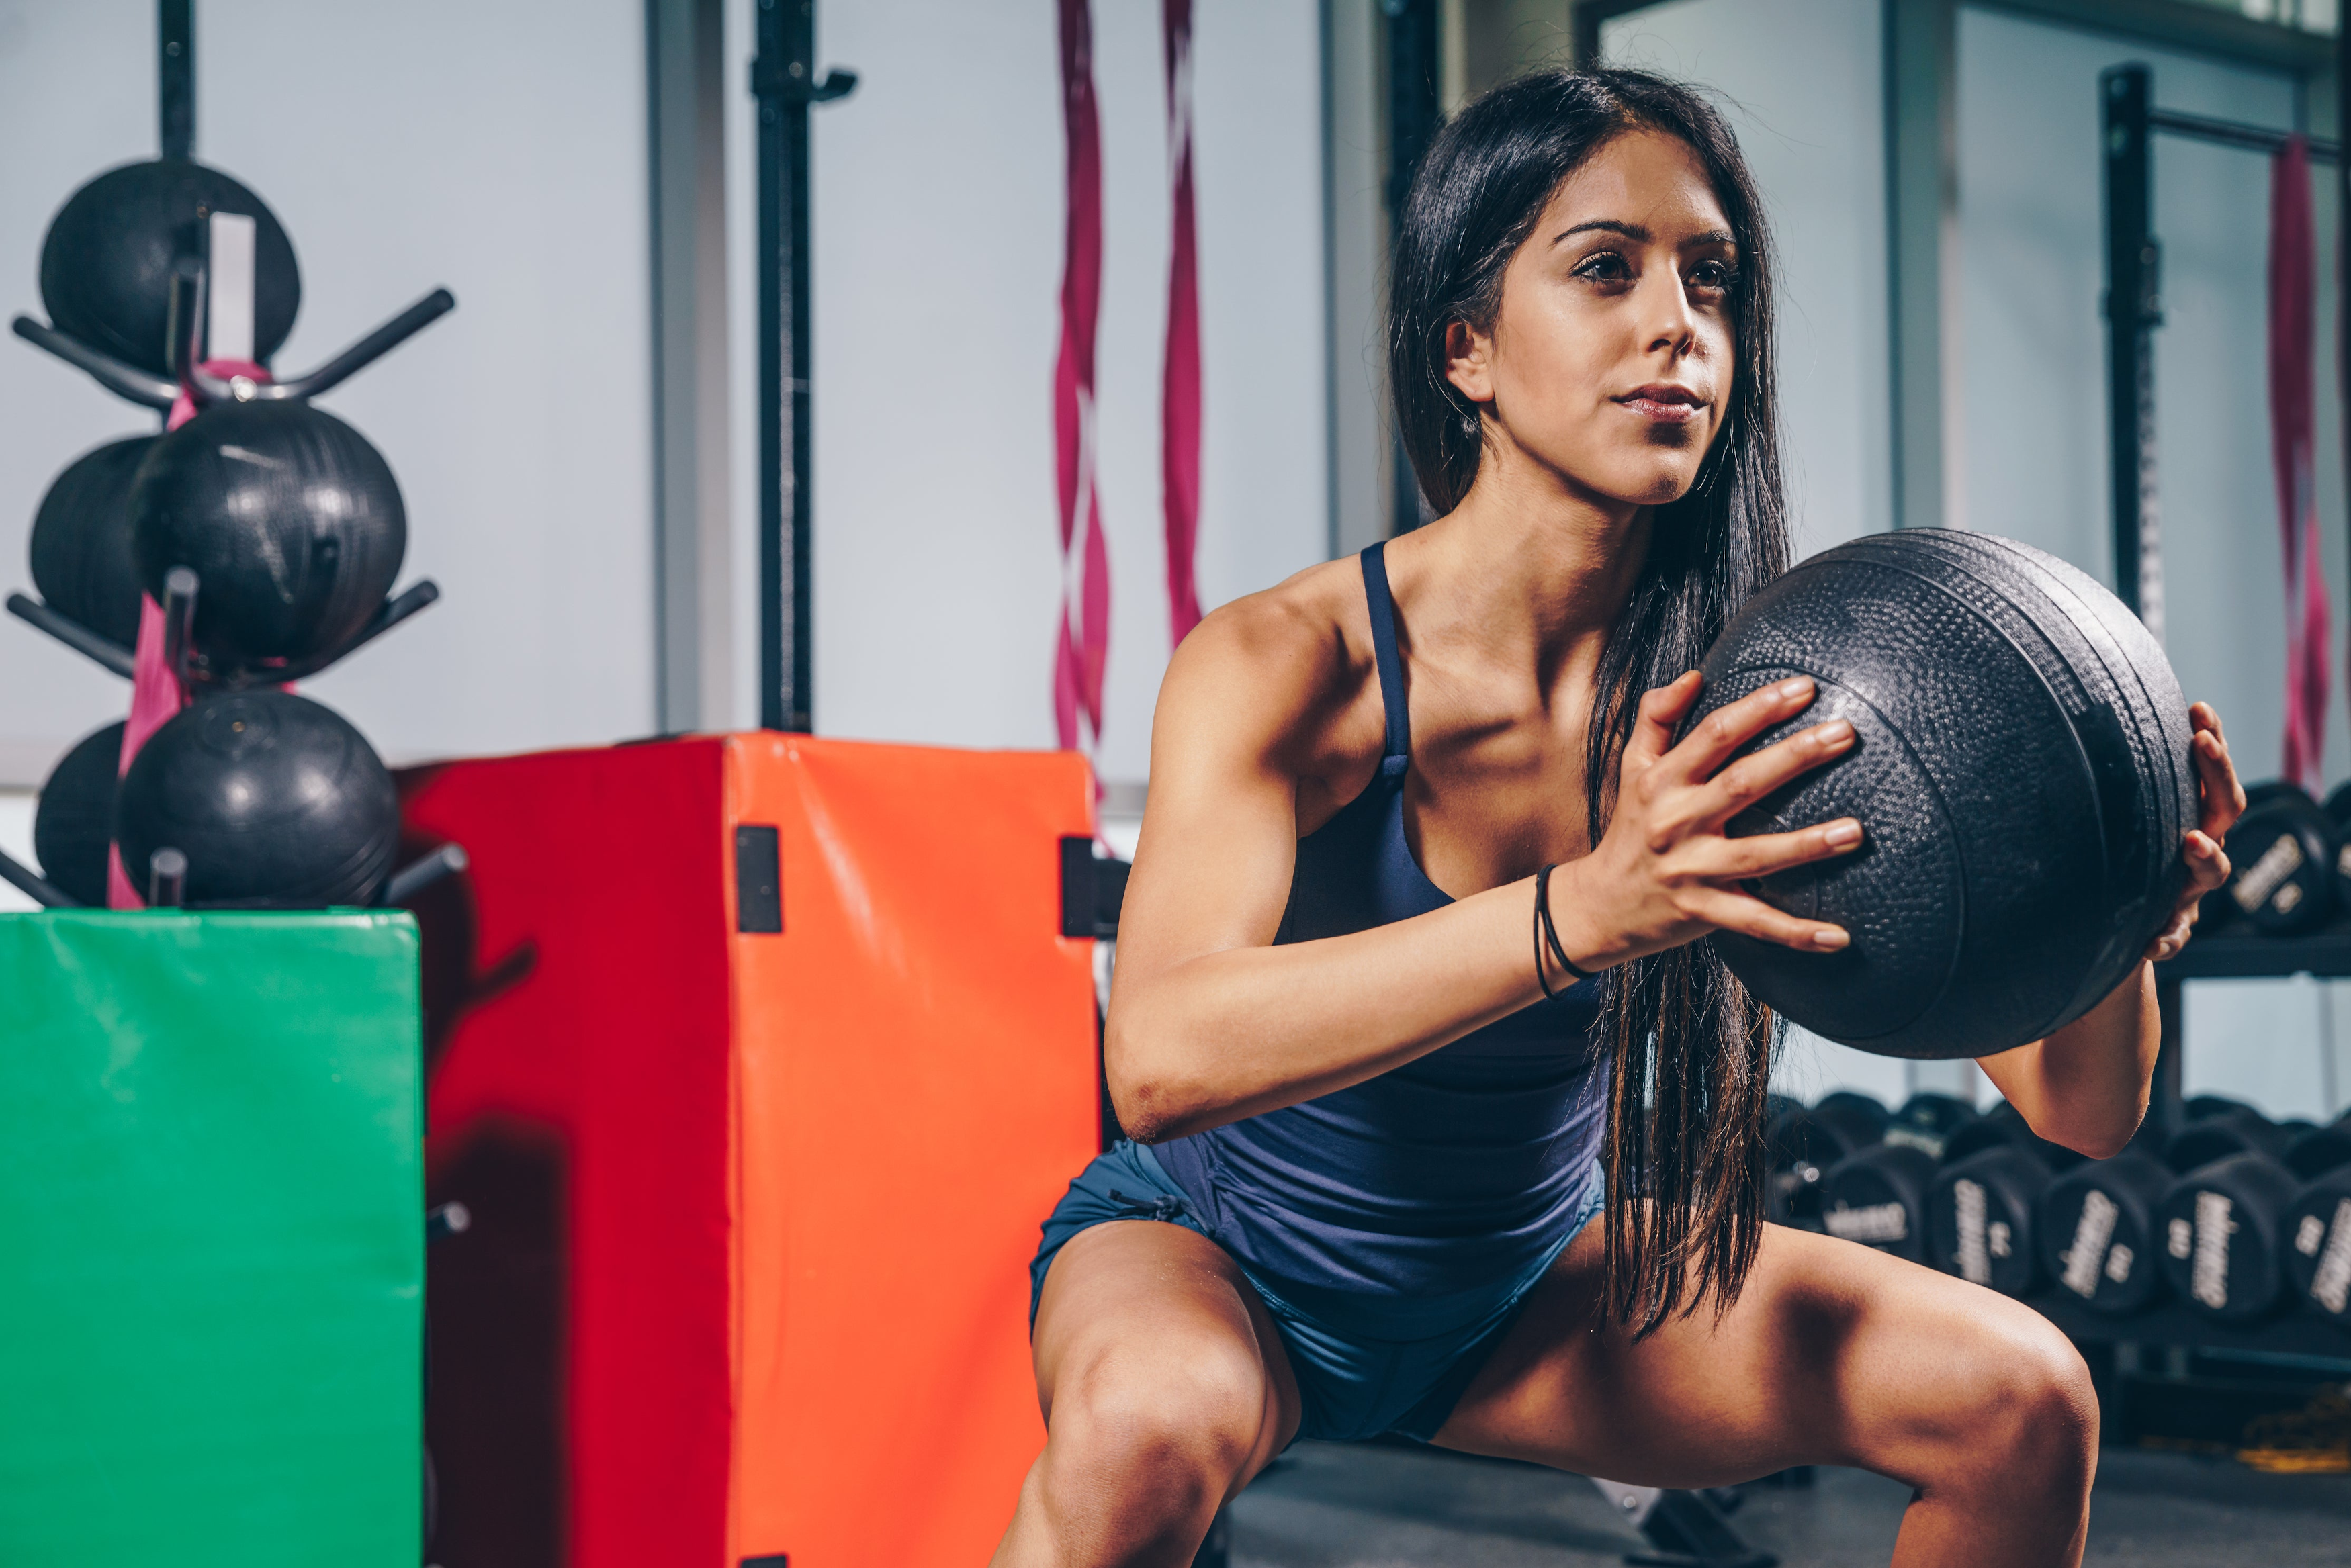 Woman in a squating possition in gym setting holding a weight ball in her hands